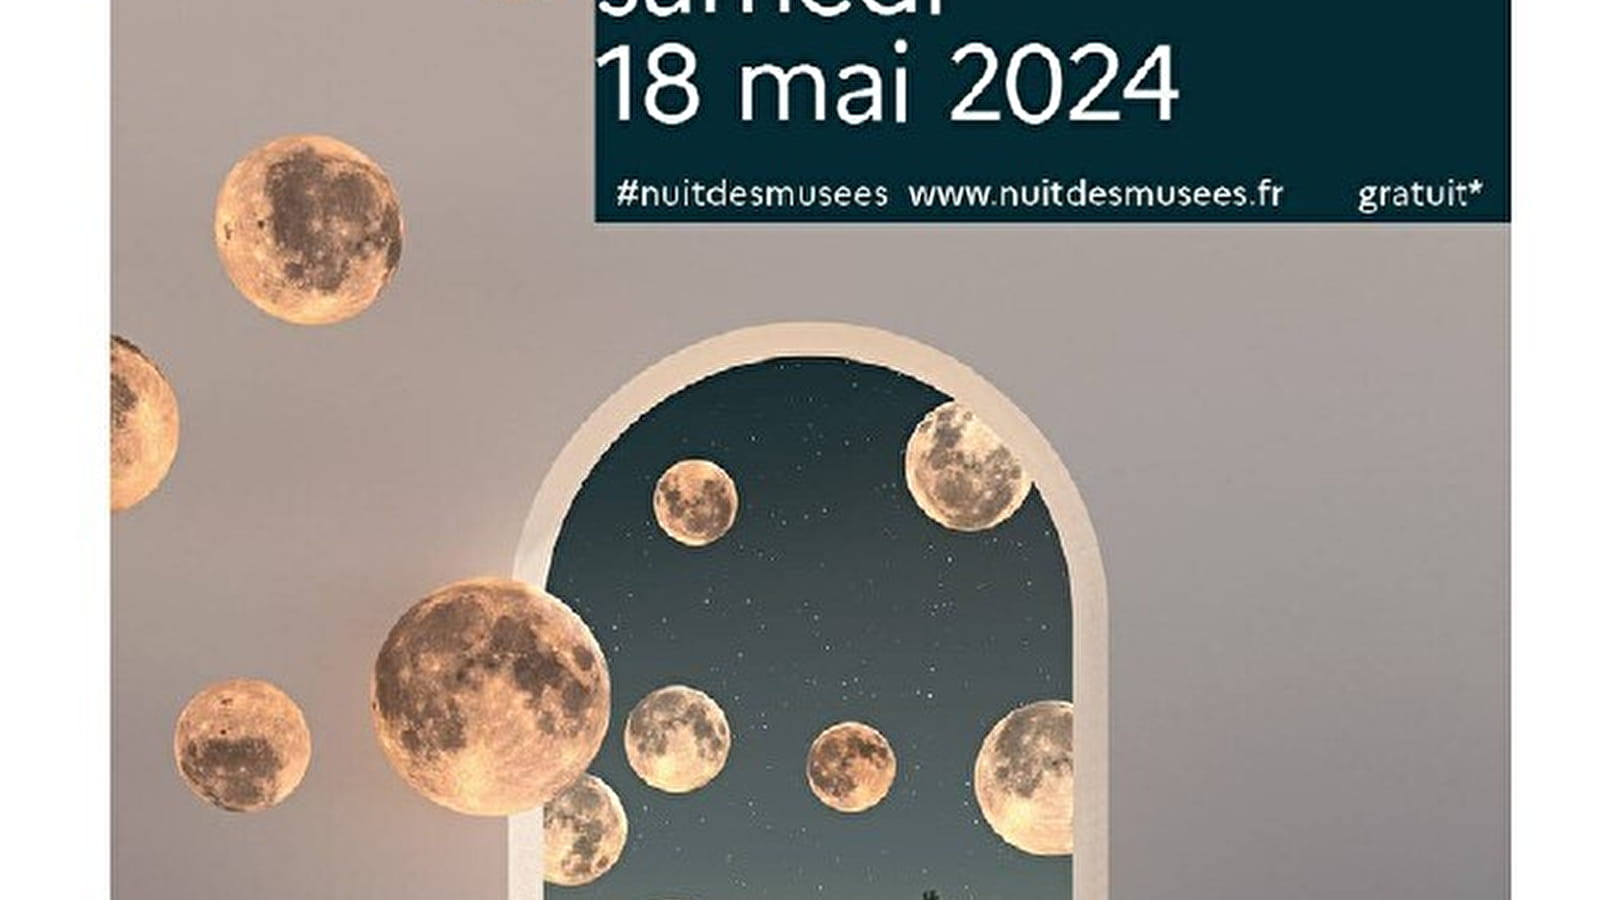 European Museum Night at the Autun Natural History Museum